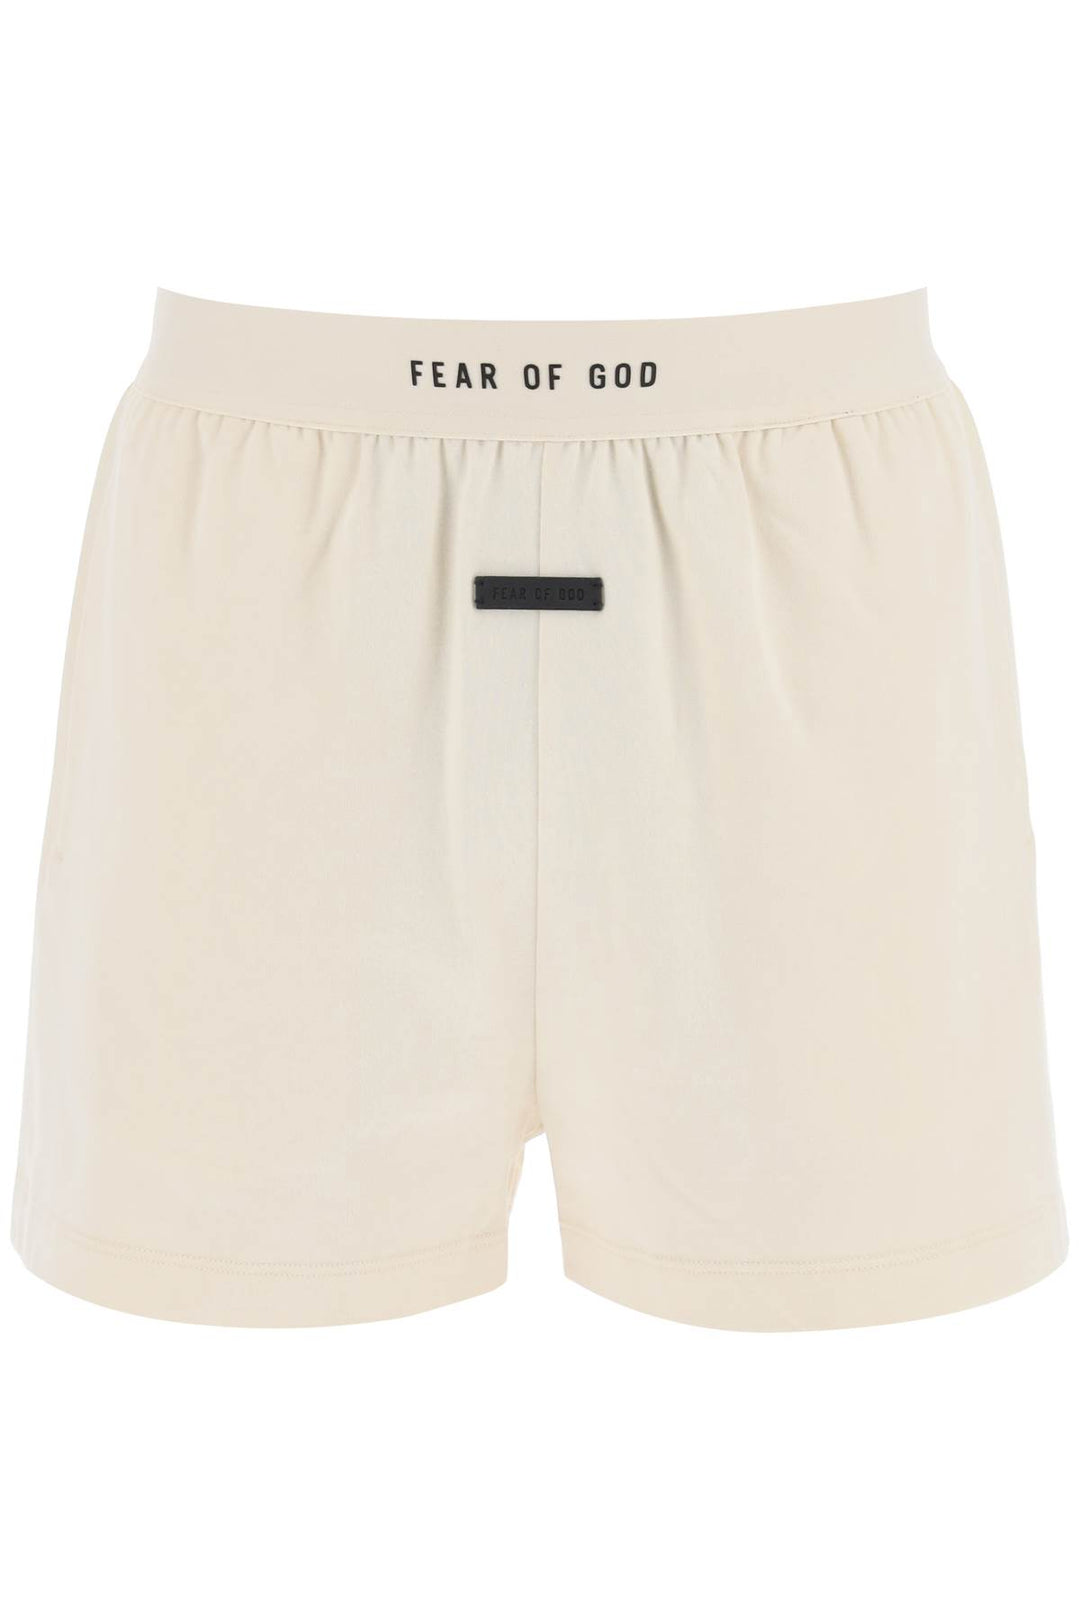 Fear of god the lounge boxer short-0